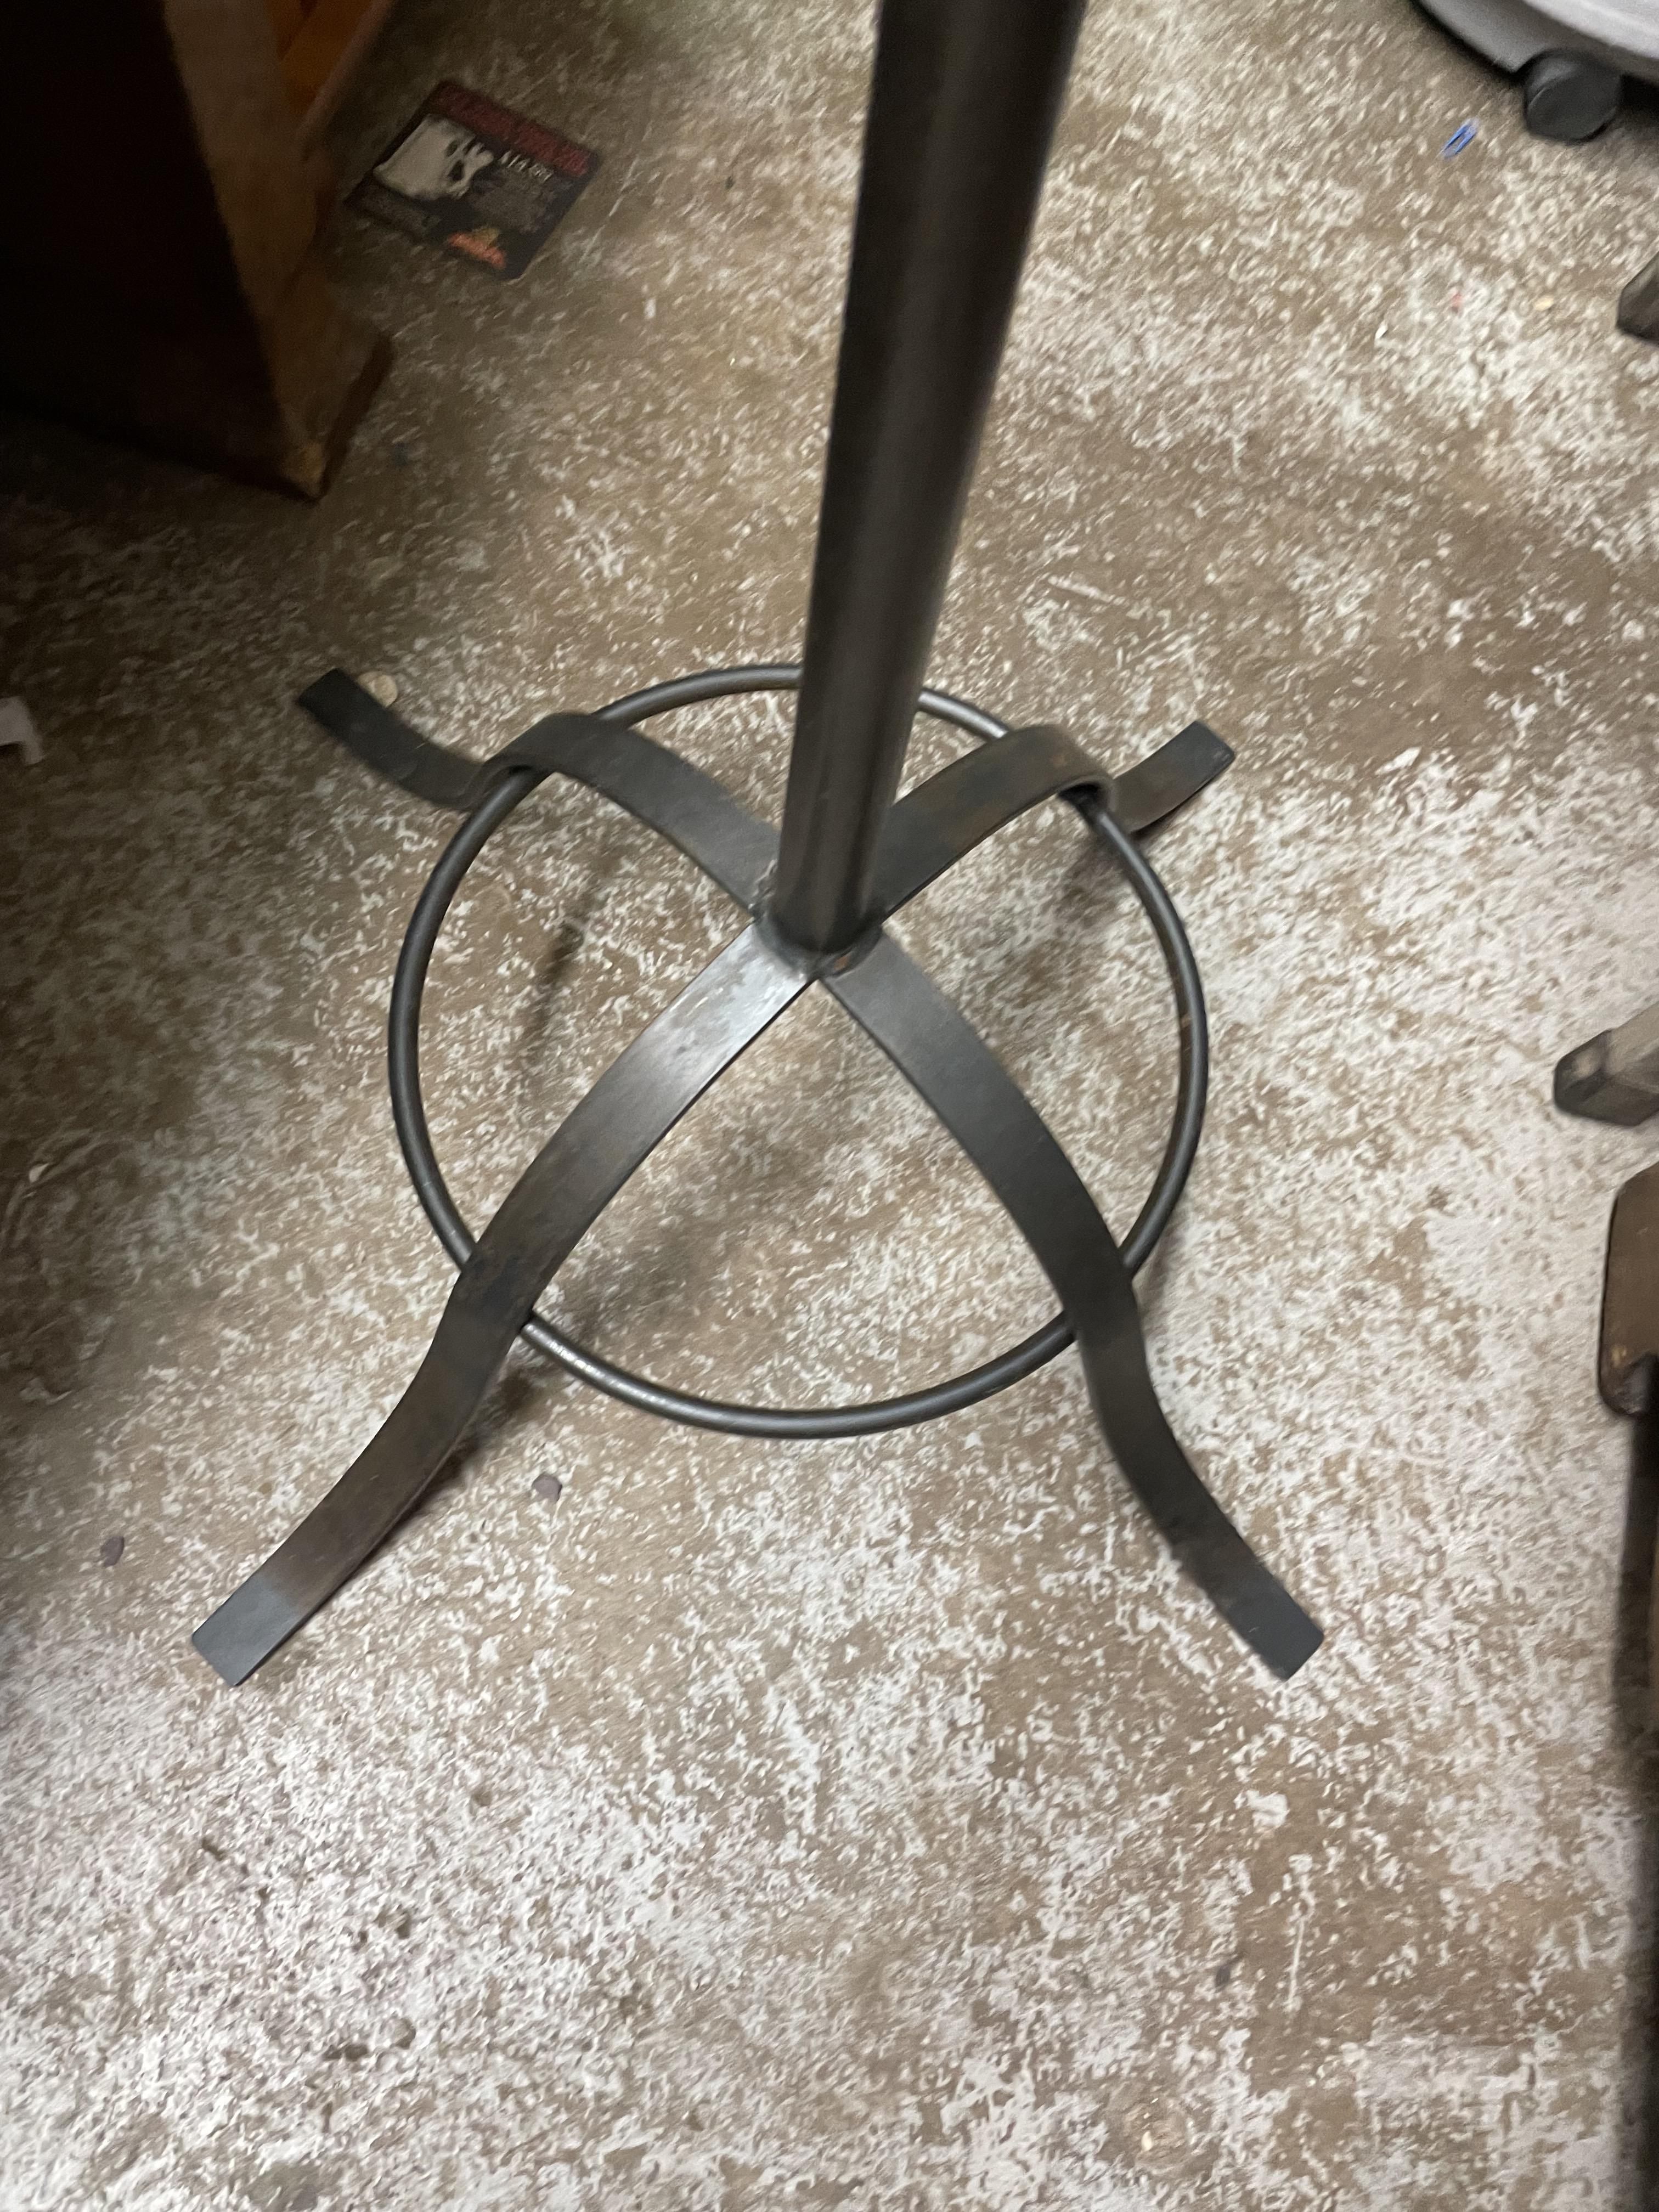 WROUGHT IRONWORK HAT AND COAT STAND - Image 2 of 3